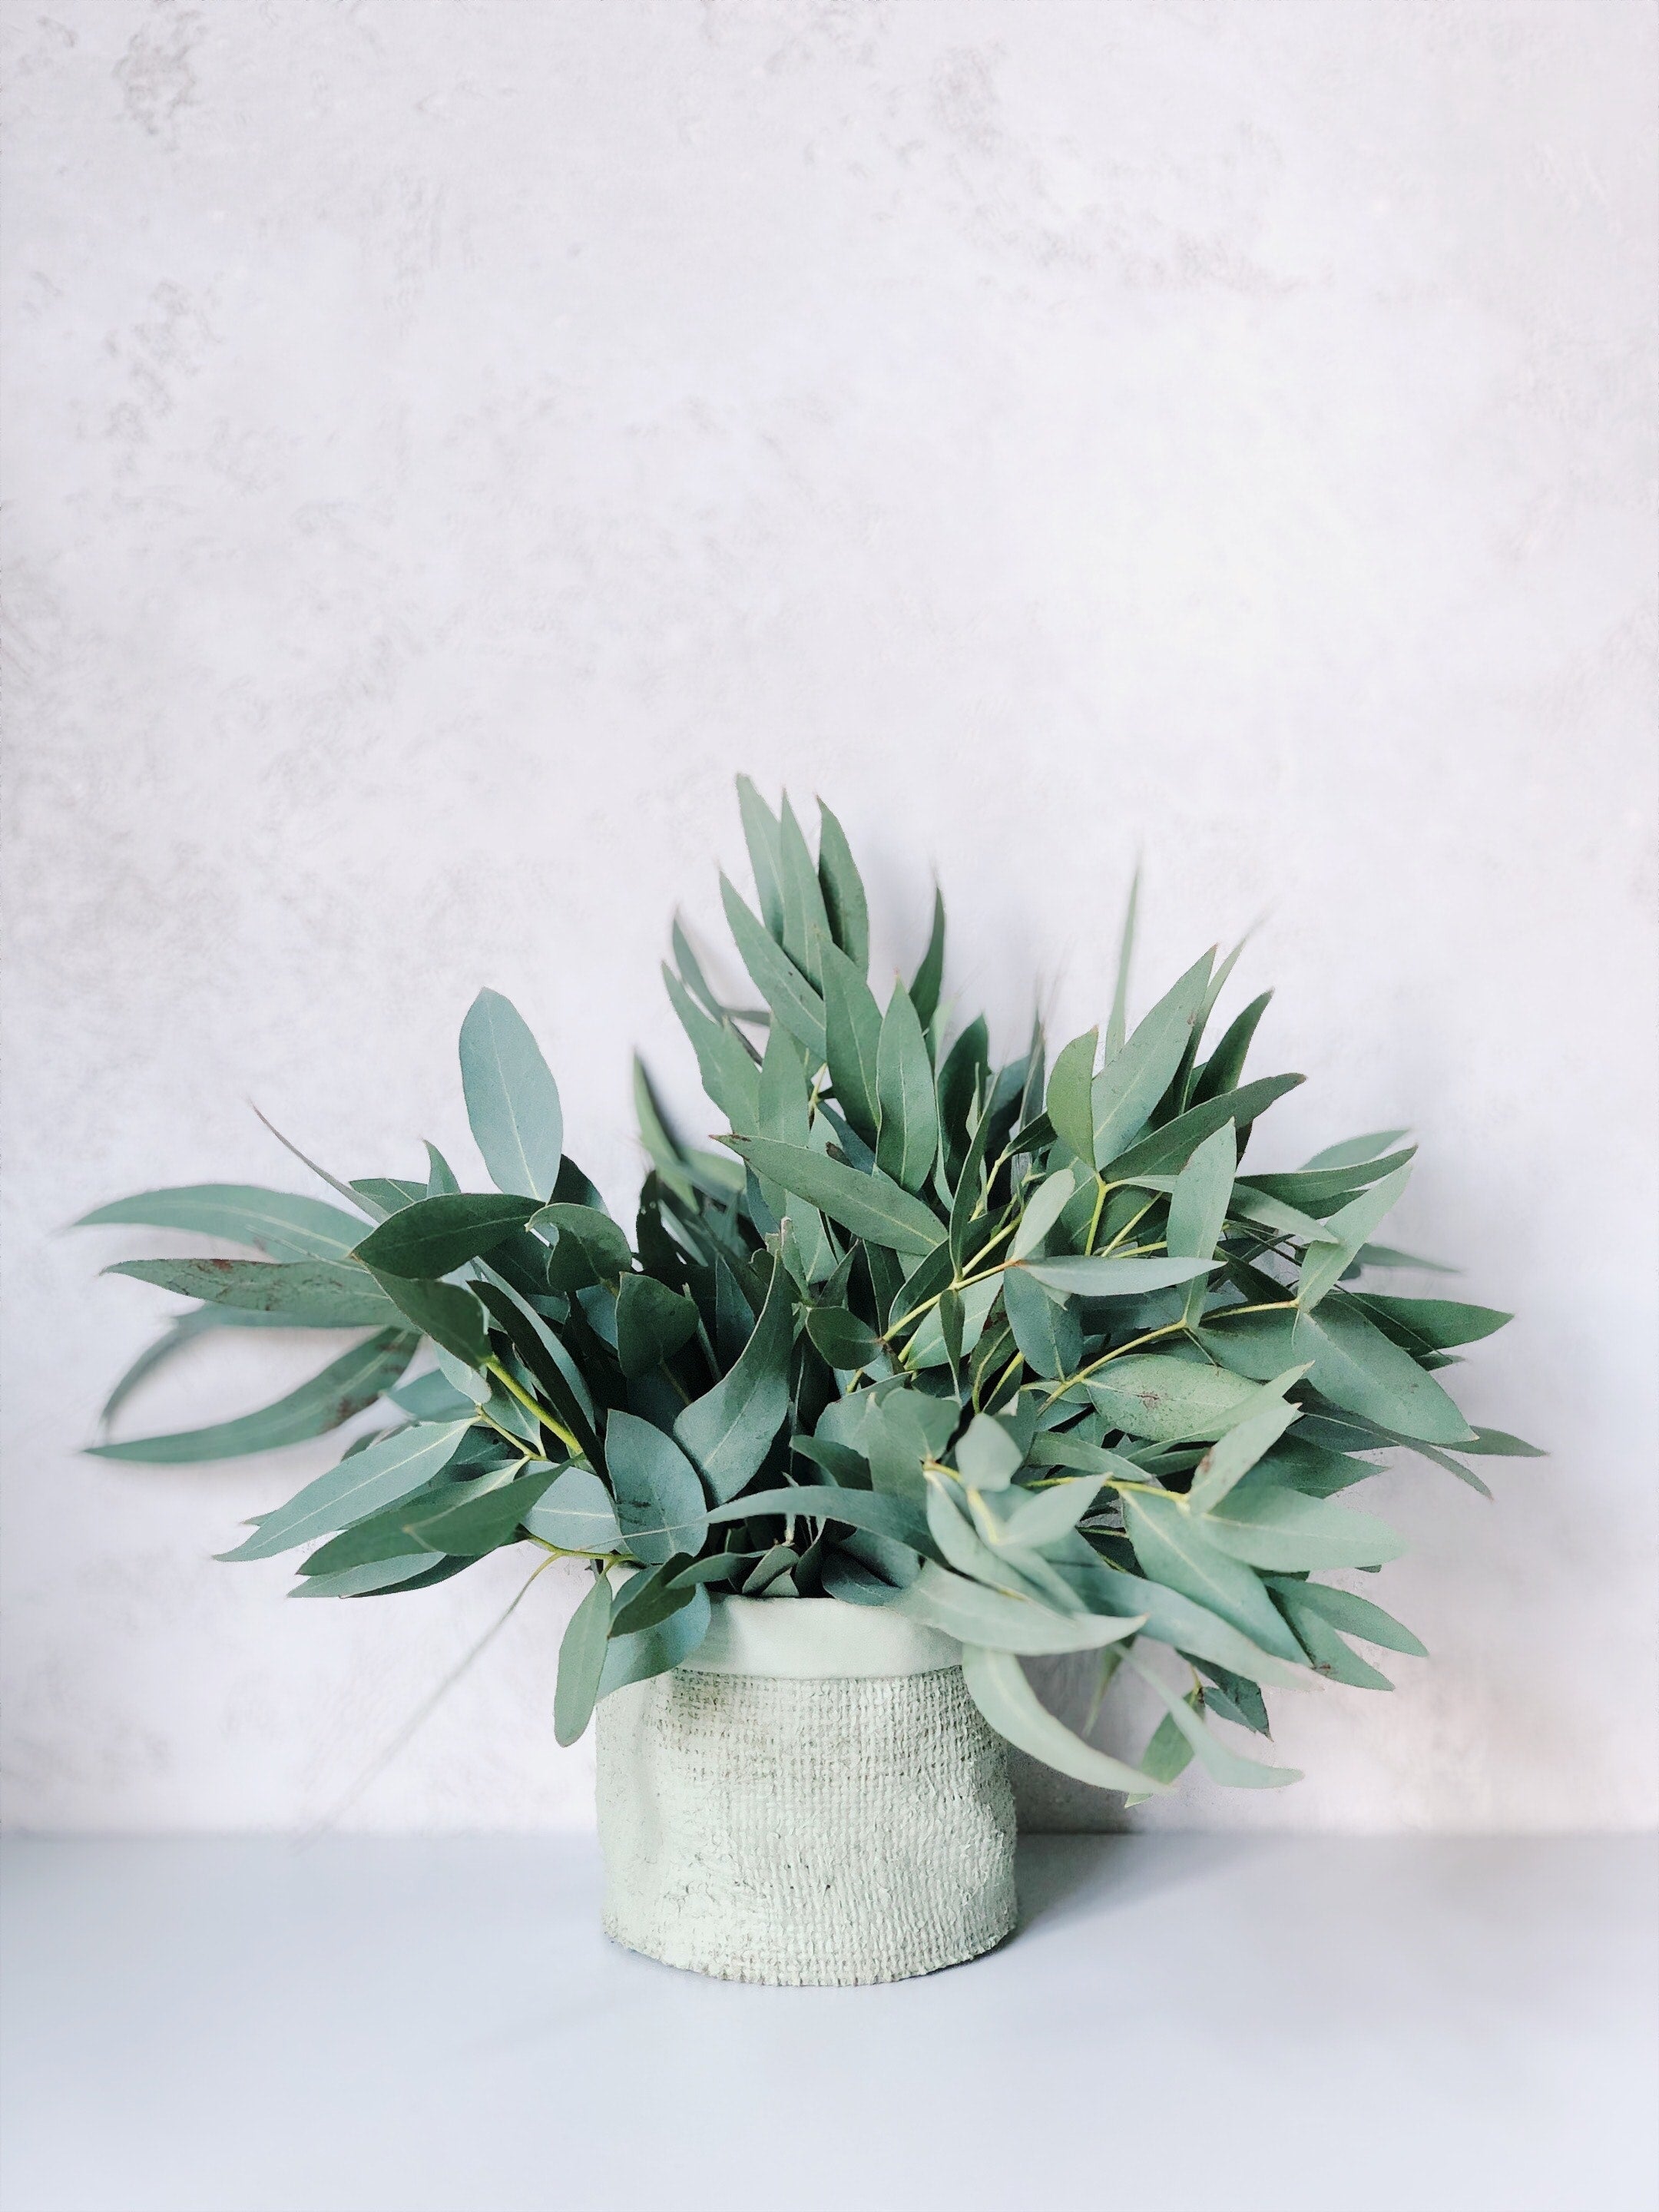 The Best Essential Oil for Flu & Colds: Eucalyptus!